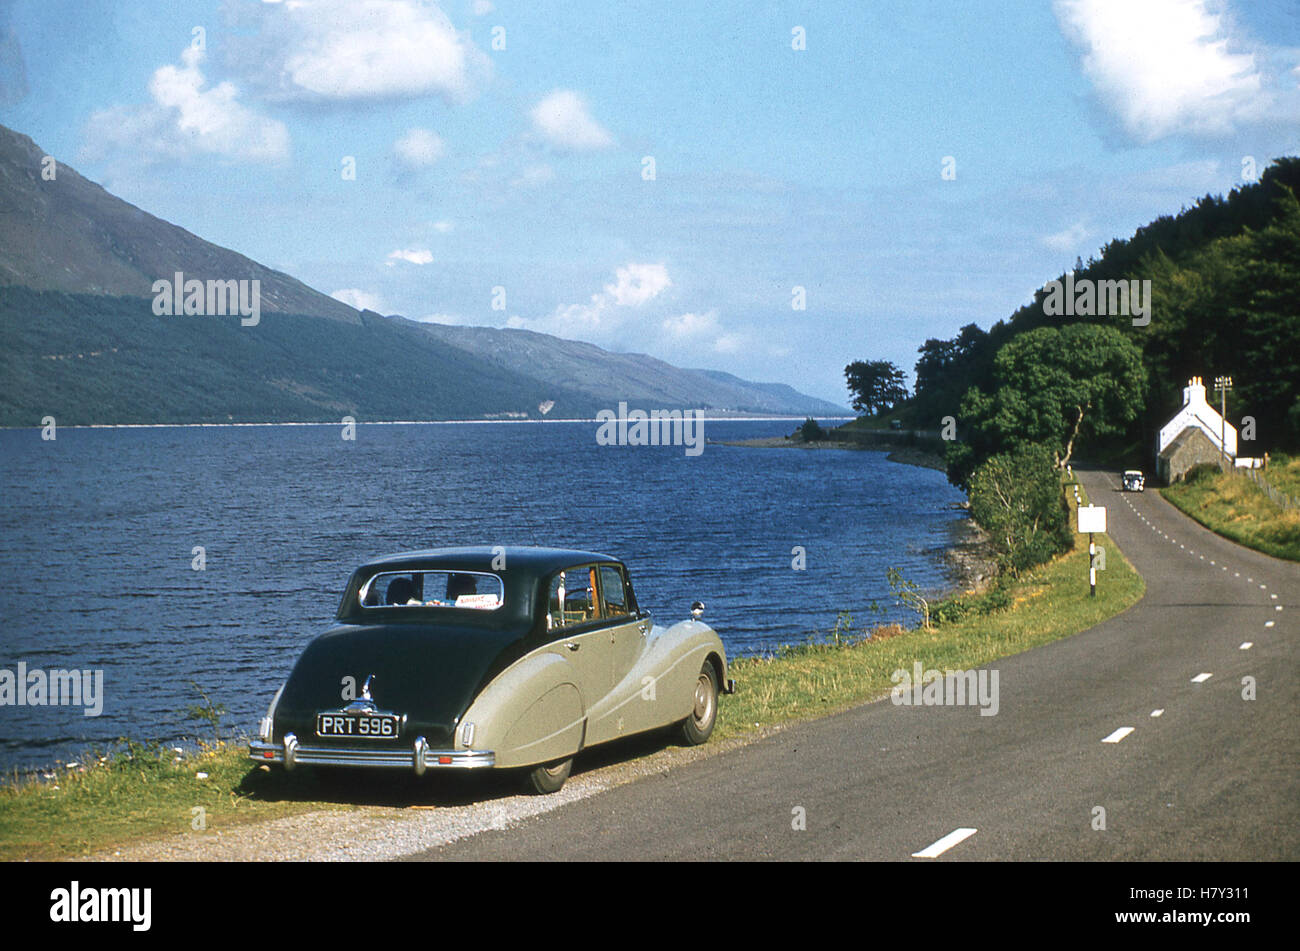 1950s, historical, Touring the lakes by car in this era. Luxury Daimler car parked on  roadside verge, England, UK. Stock Photo